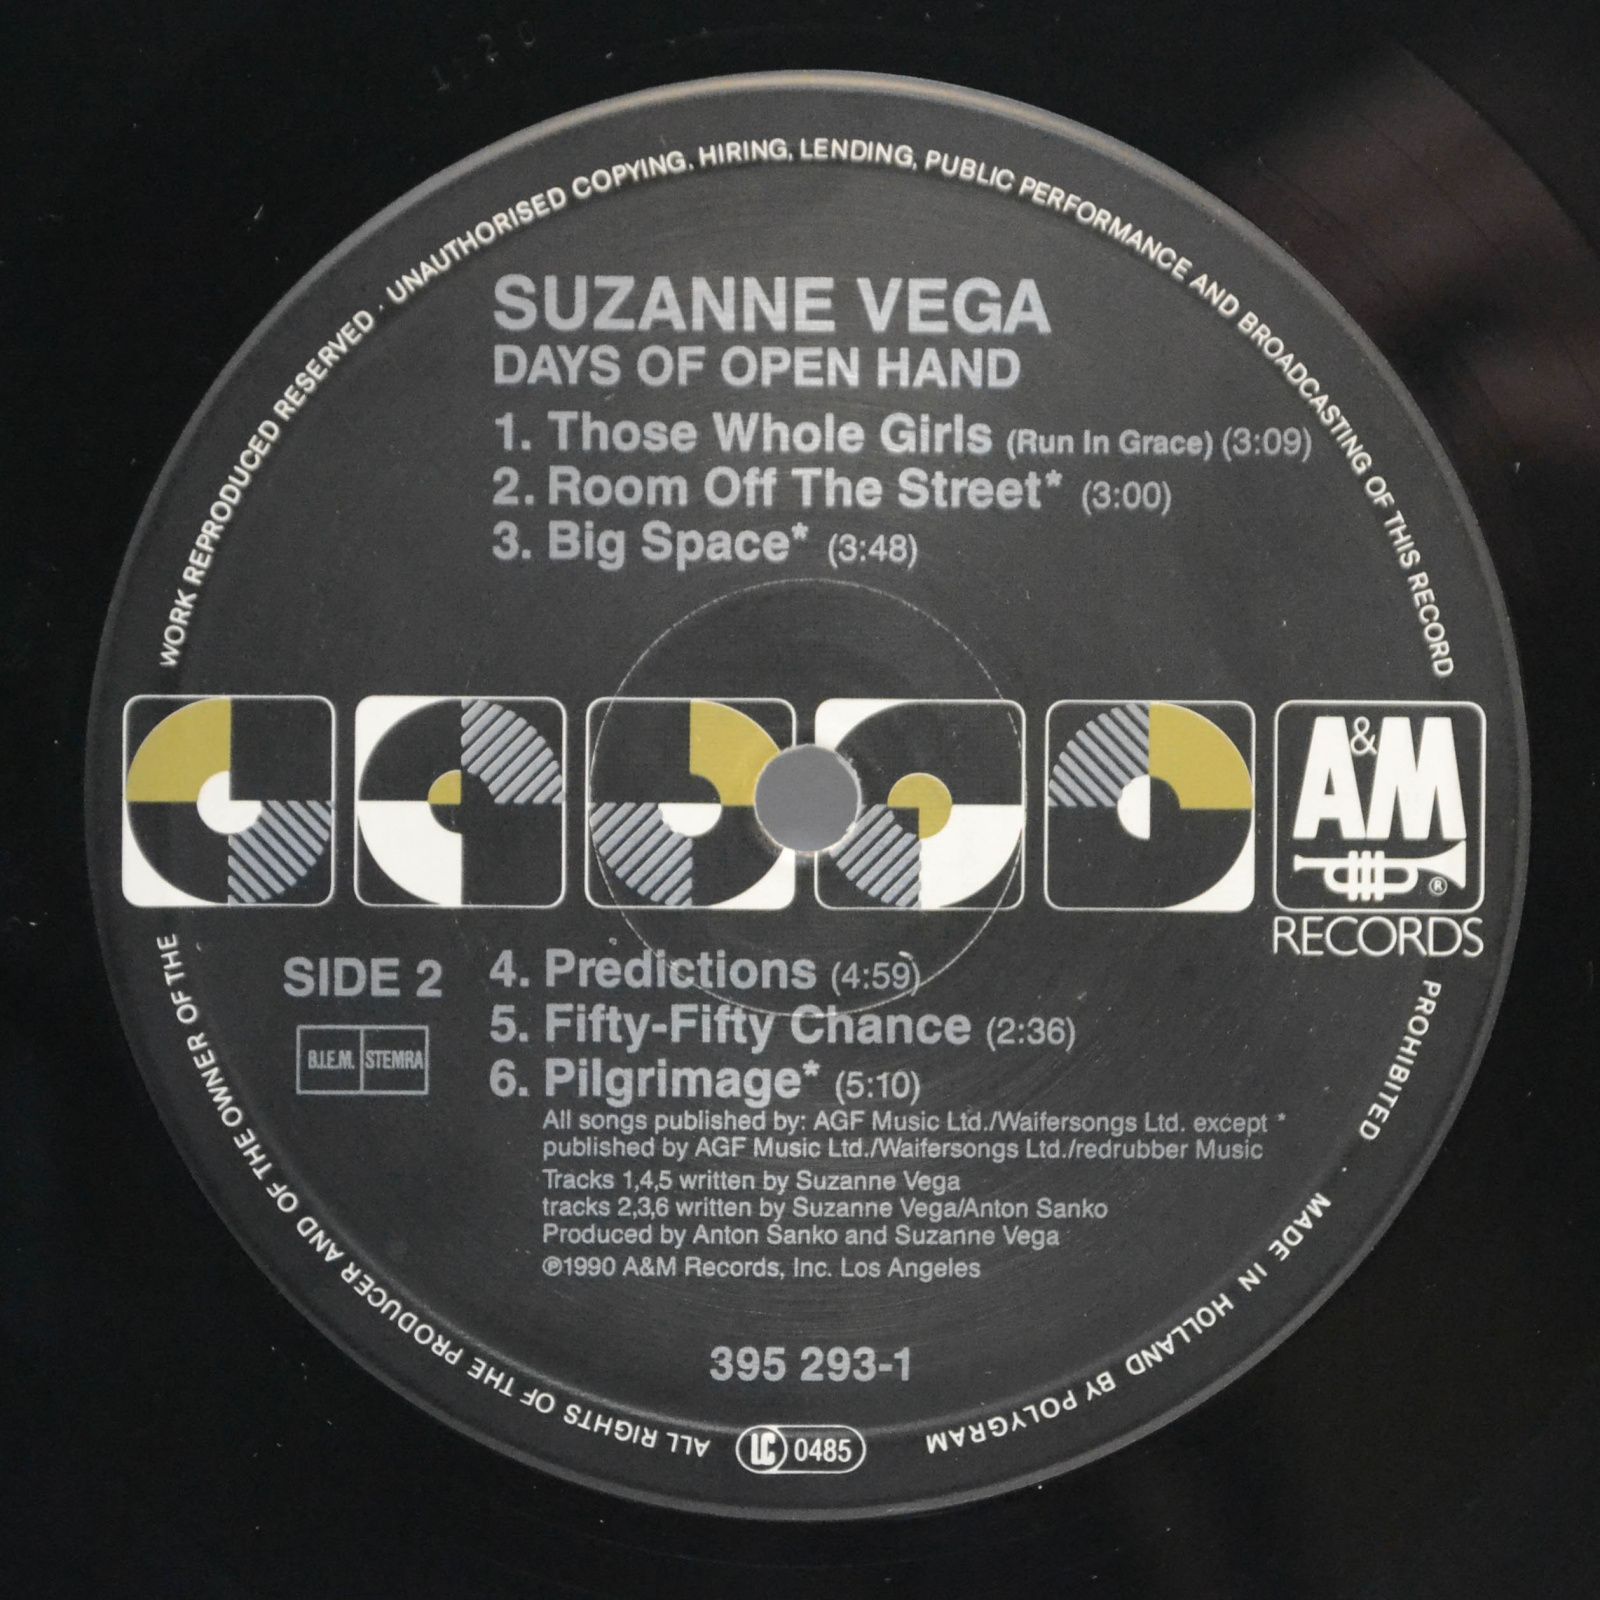 Suzanne Vega — Days Of Open Hand, 1990